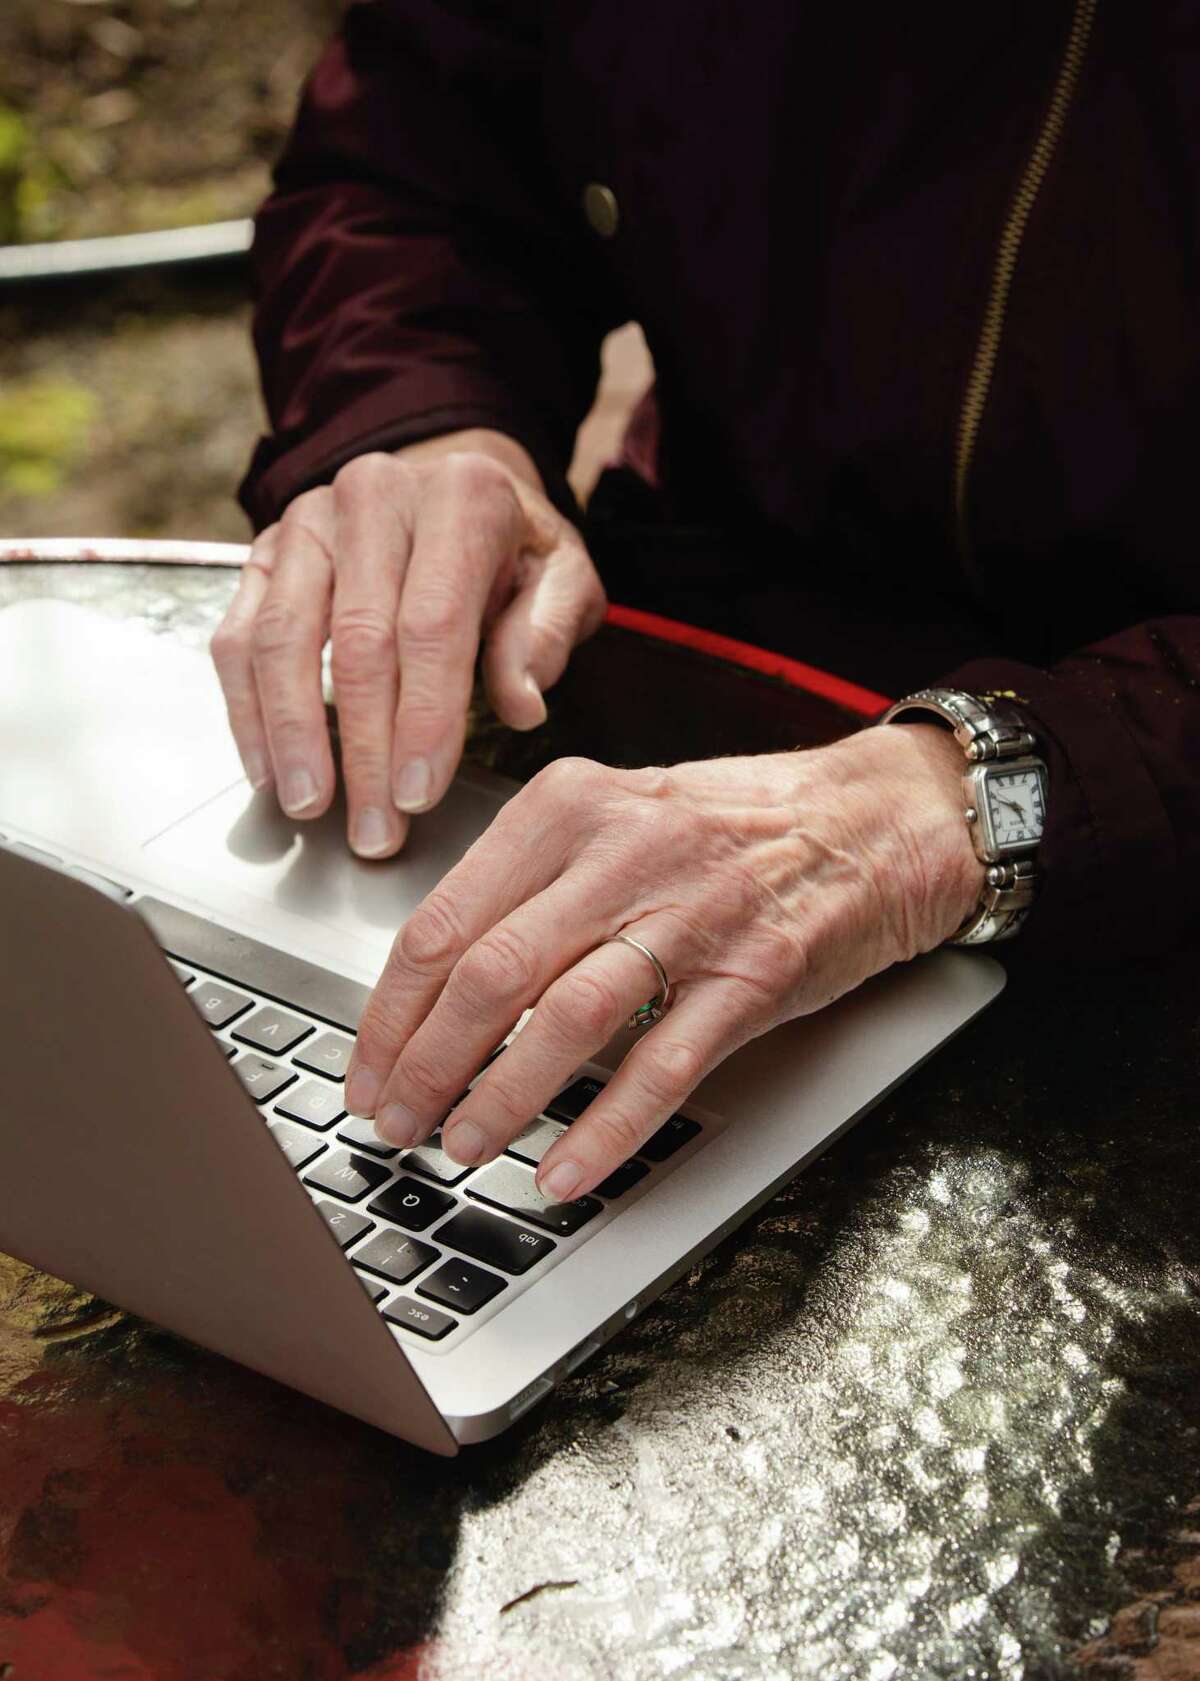 With so much of our lives pushed online, it’s incredibly important that we provide older adults with the resources they need to combat all the issues they face in the virtual world.